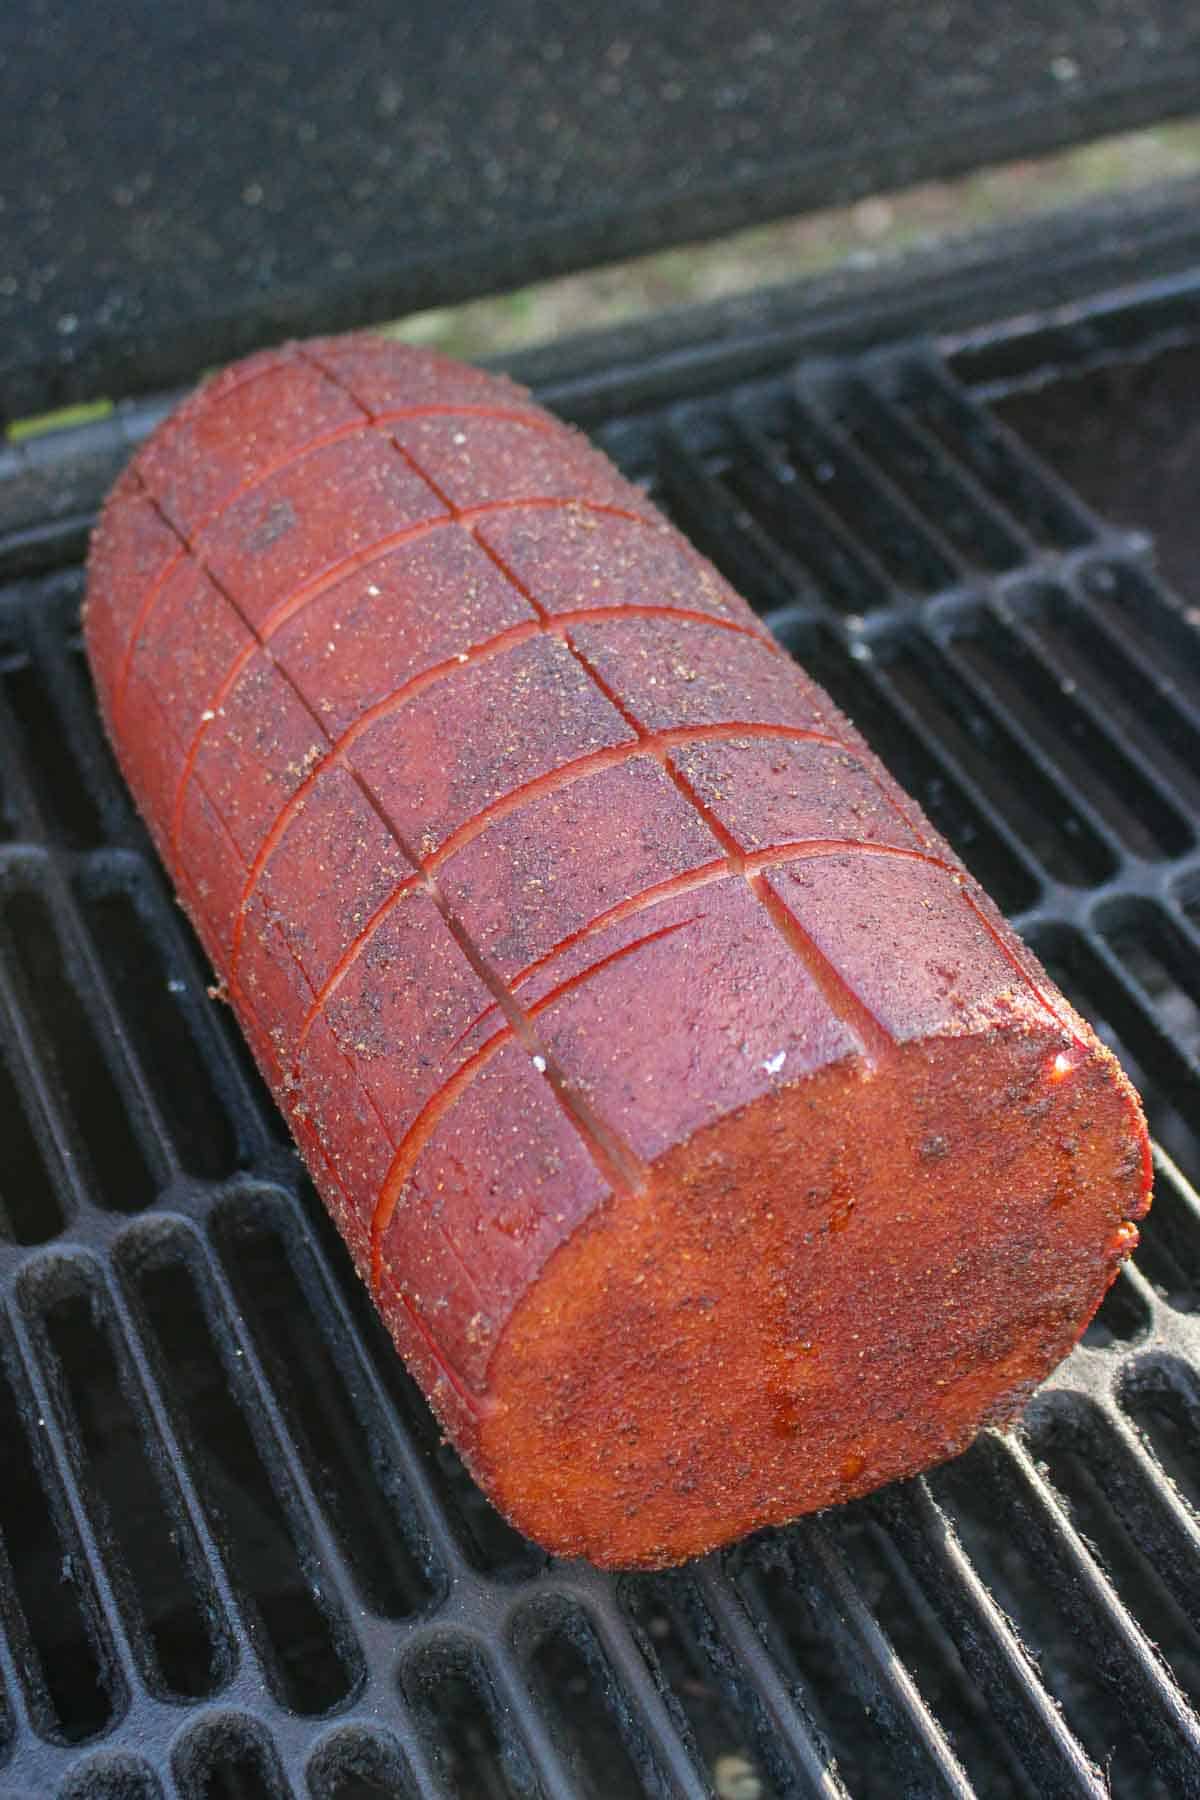 The bologna chub after it's been smoked.